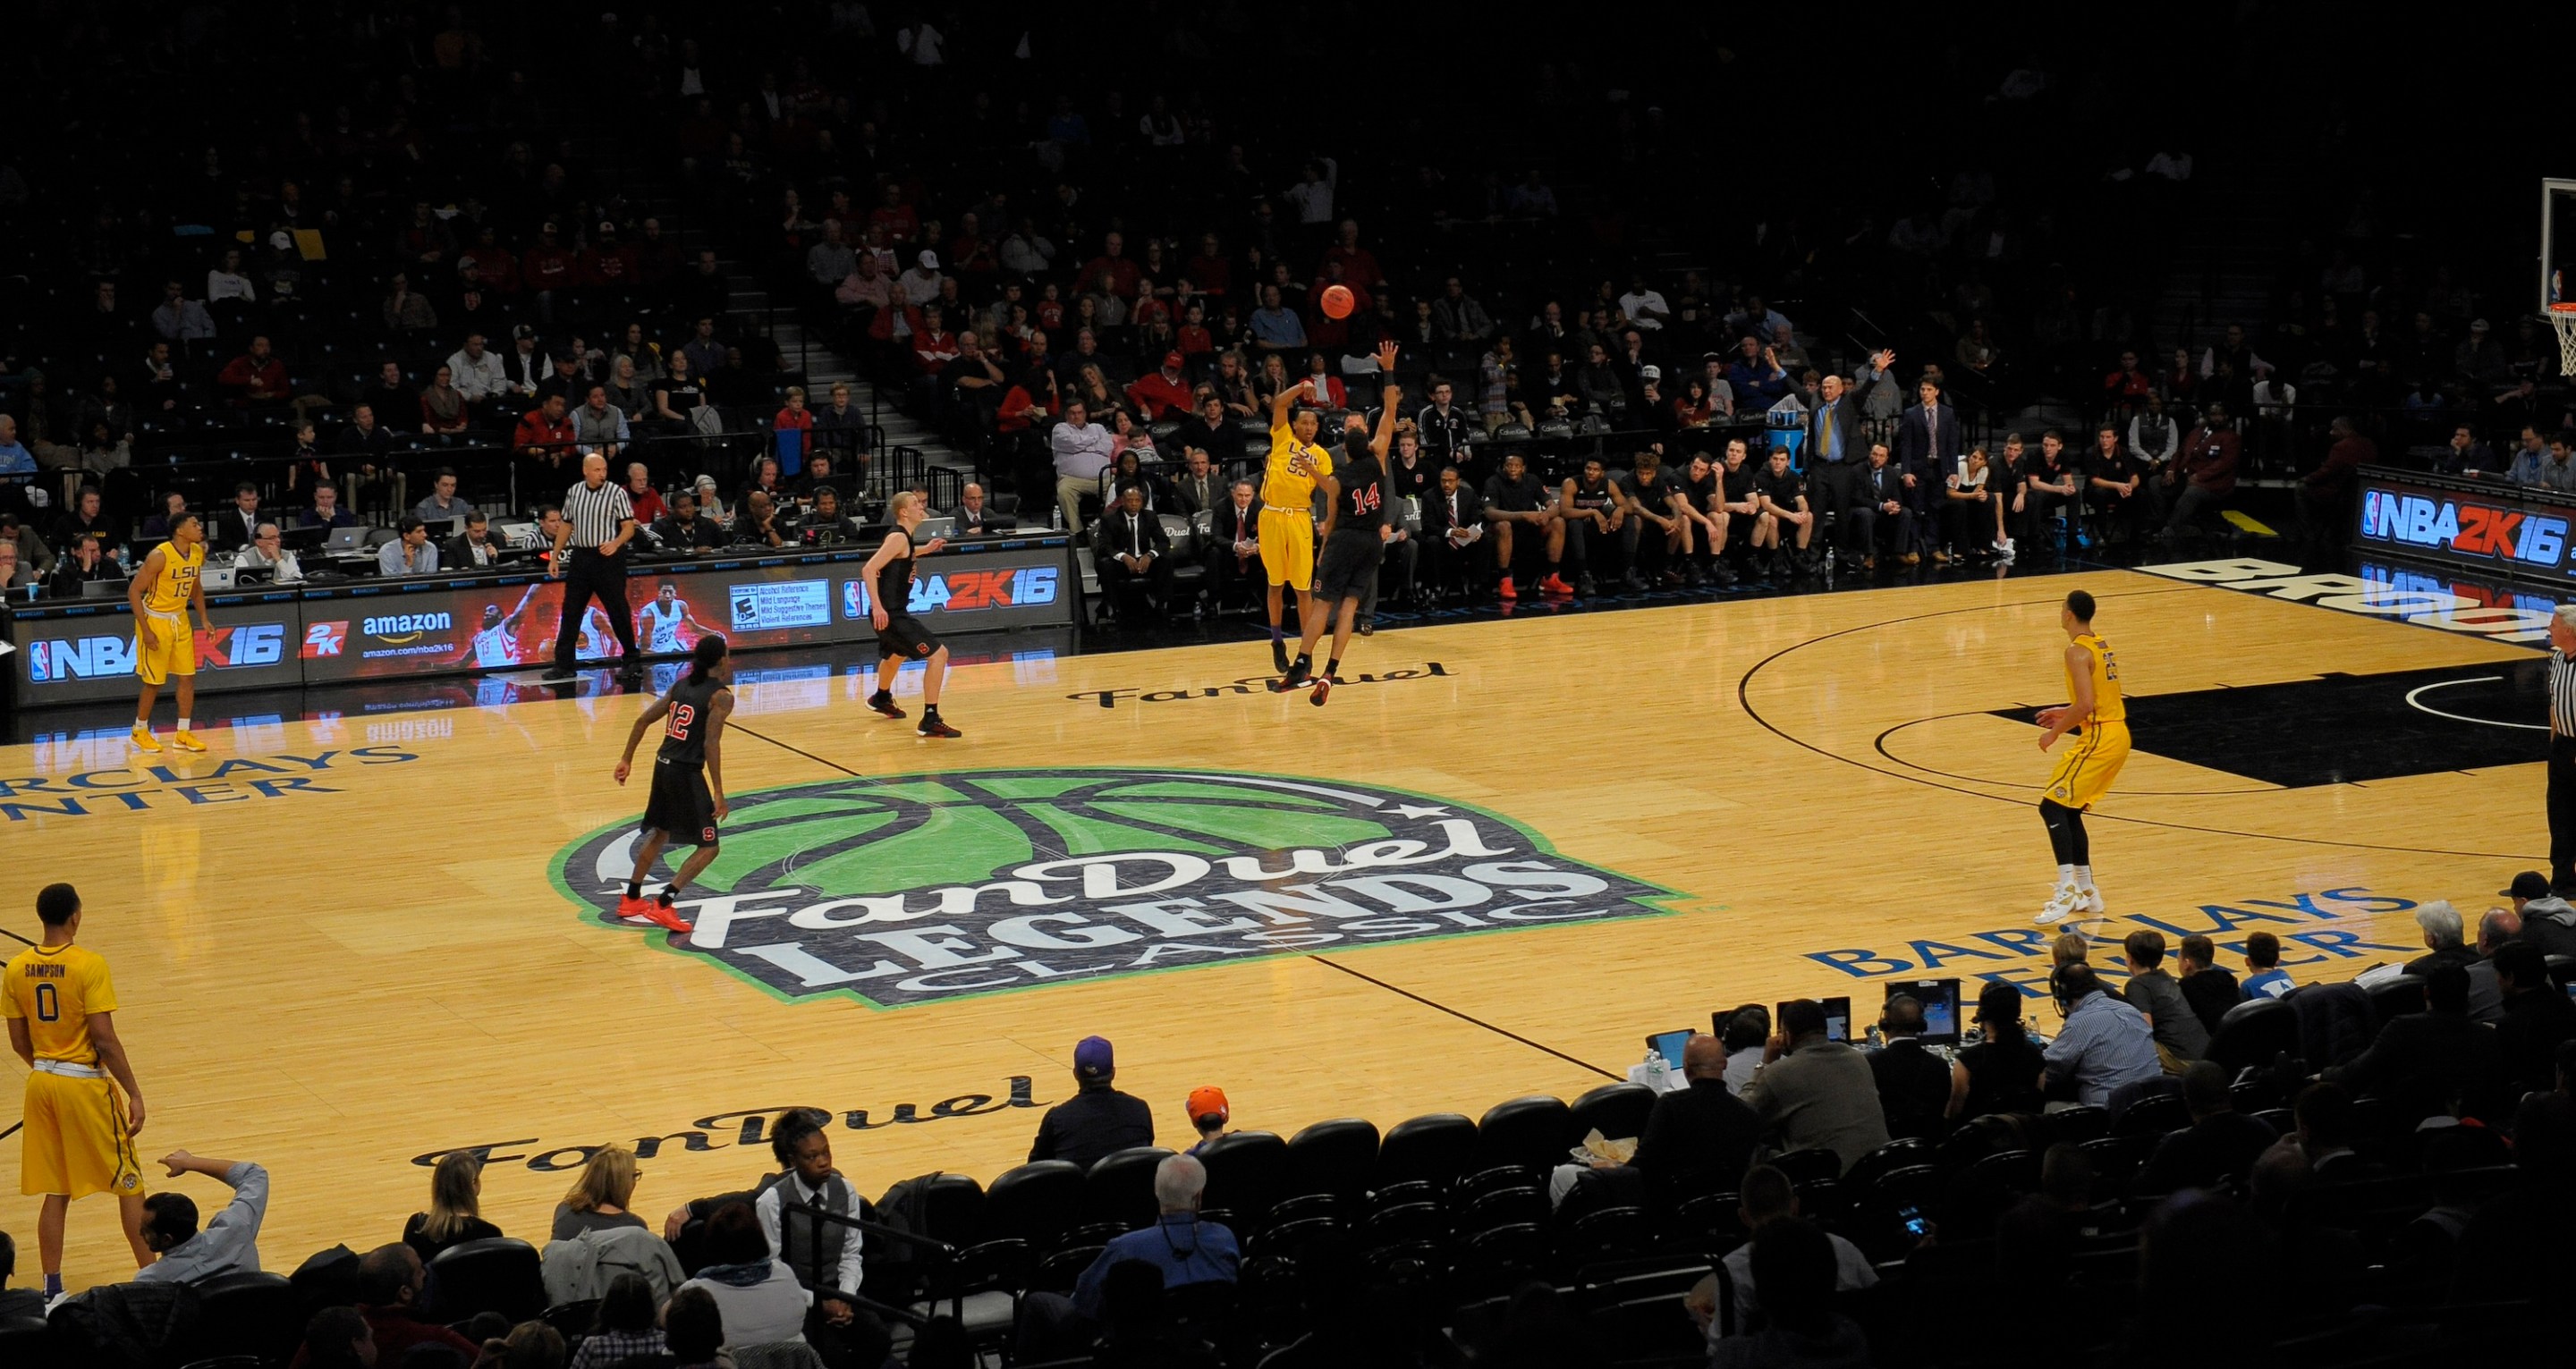 NEW YORK, NY - NOVEMBER 24: Overall view of the FanDuel logo at the Legends Classic, played between the LSU Tigers and the North Carolina State Wolfpack at the Barclays Center on November 24, 2015 in the Brooklyn borough of New York City. FanDuel was the primary sponsor of the tournament. (Photo by Porter Binks/Getty Images)